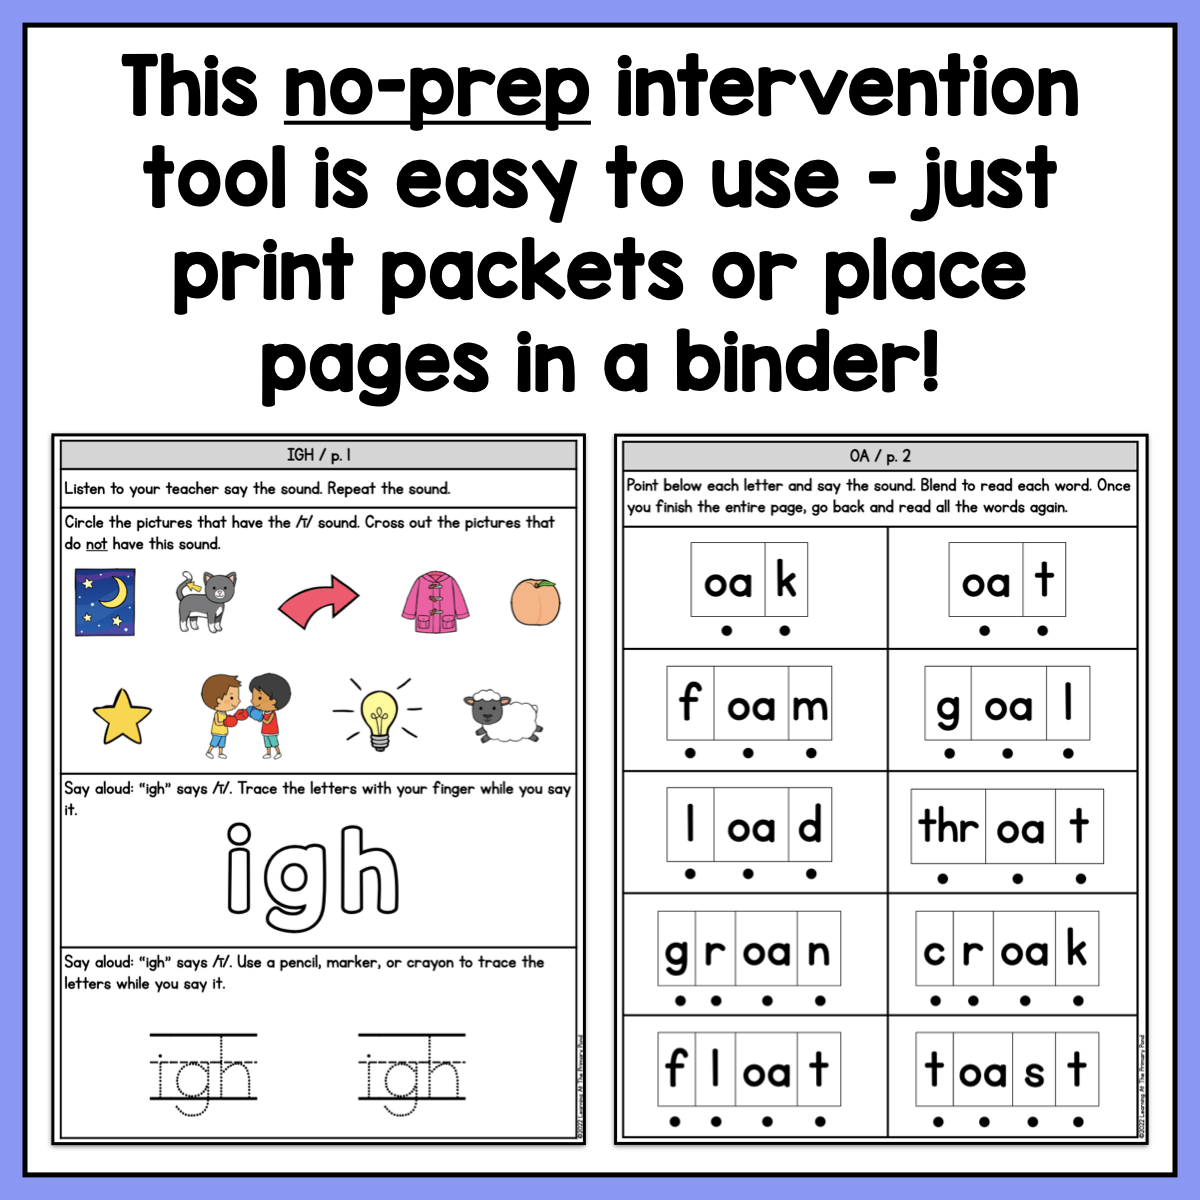 Vowel Teams Intervention Pack | No-Prep, Phonics-Based Reading Intervention - learning-at-the-primary-pond